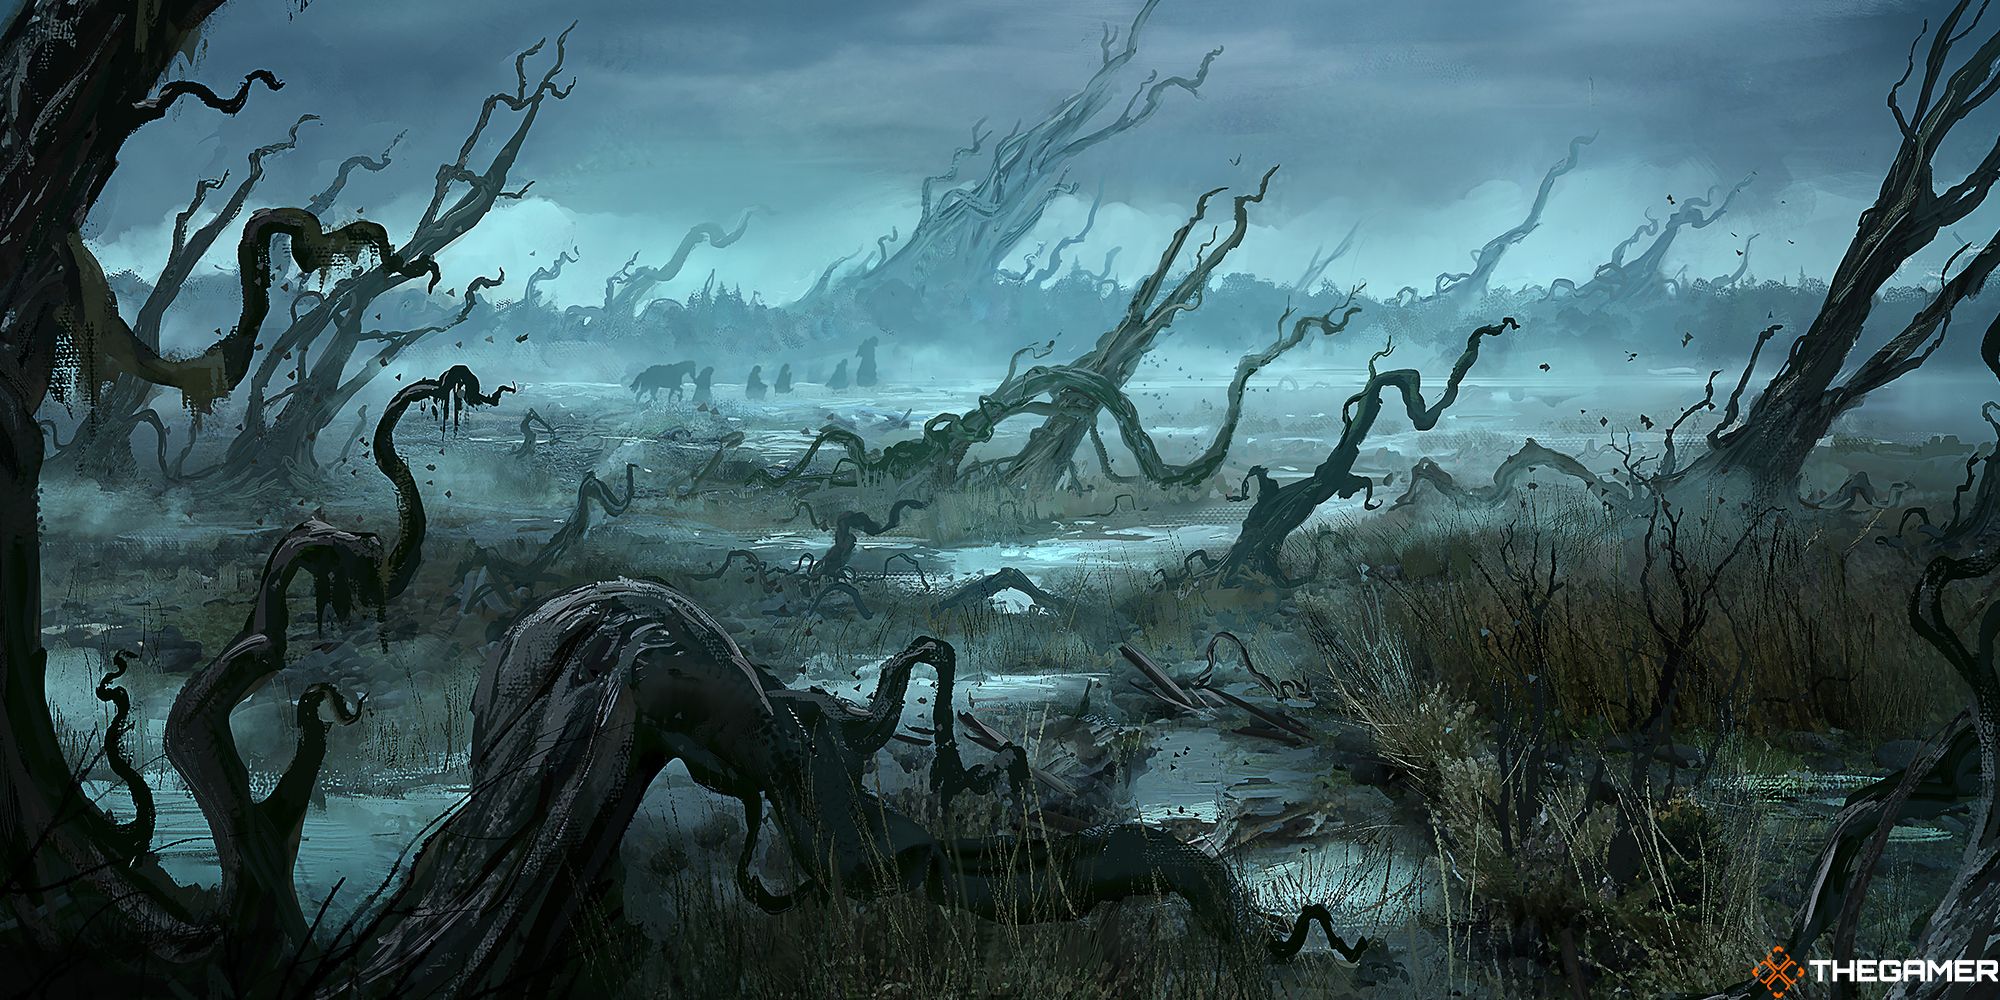 Swamp from Lord of the Rings and MTG